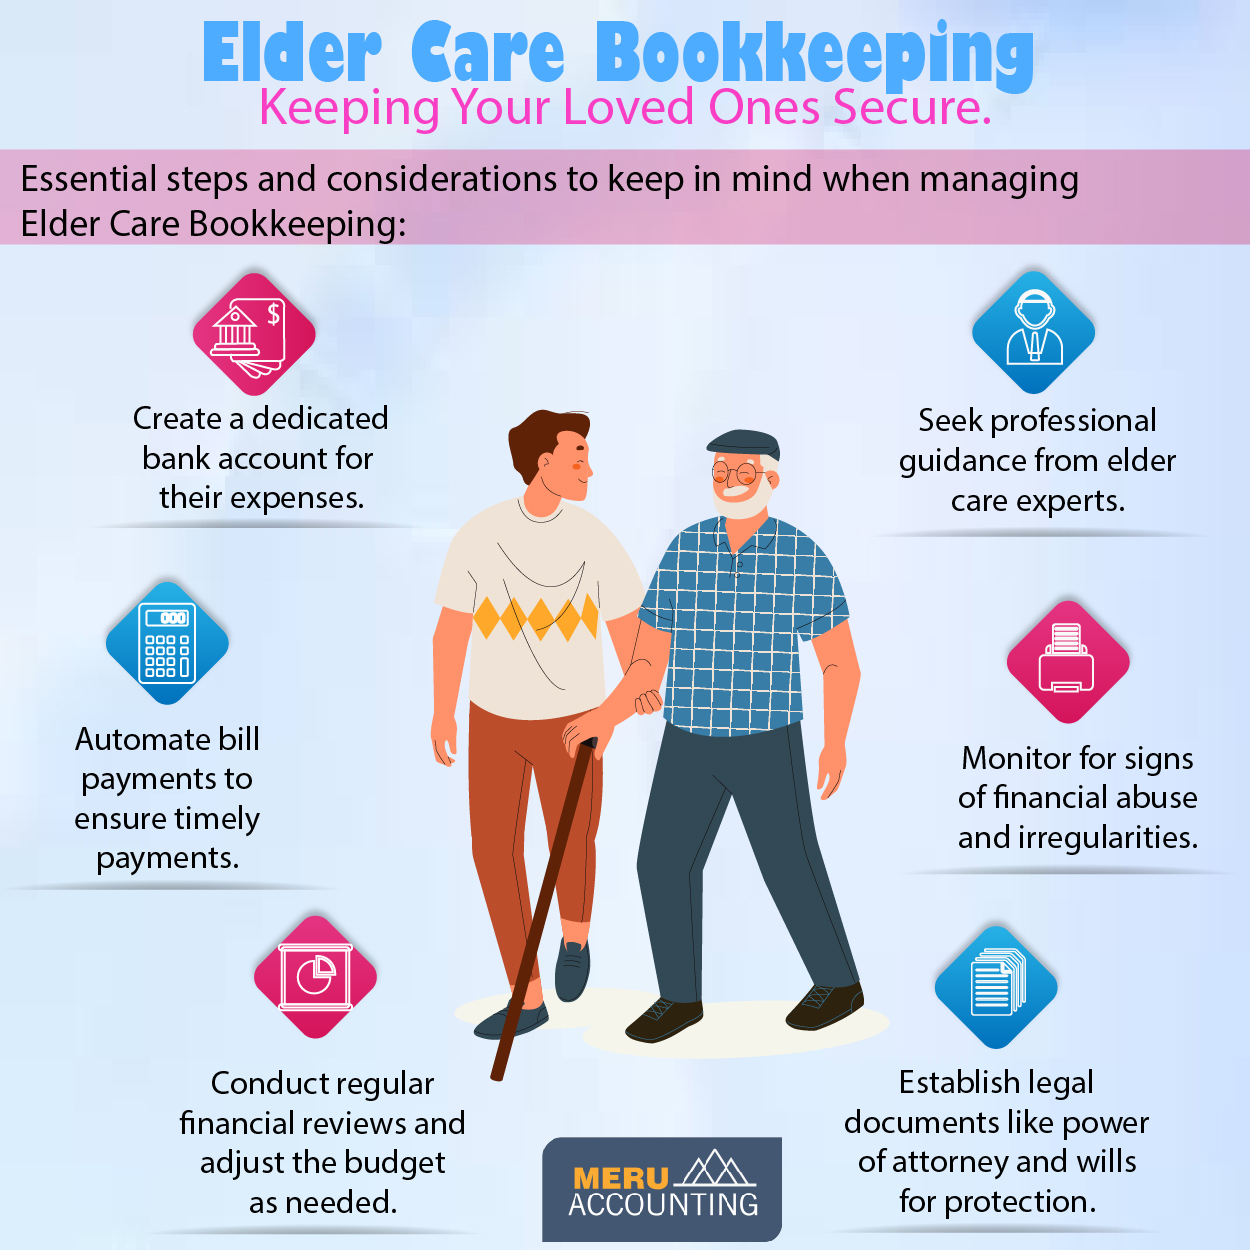 elderly care bookkeeping 1250 by 1250 01